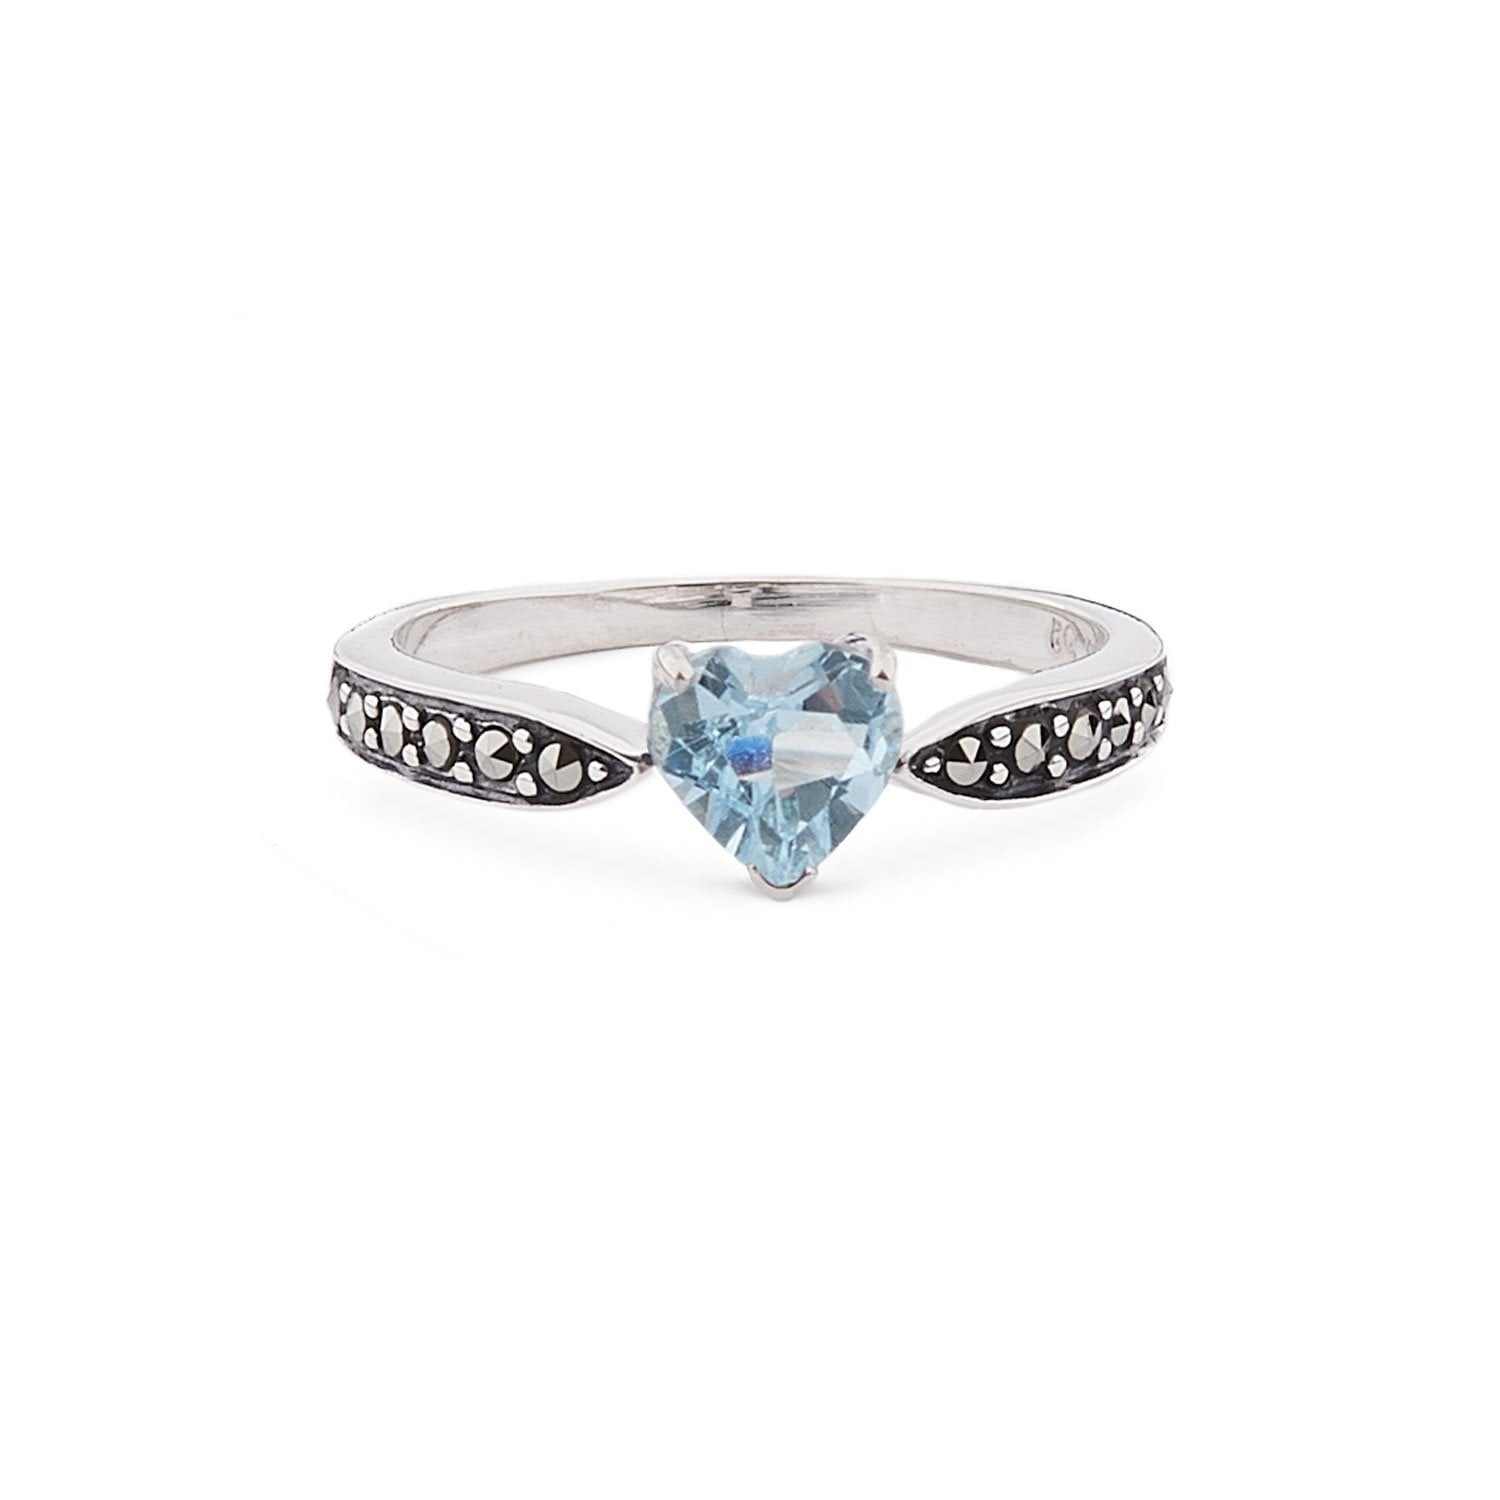 Art Deco Style Heart Ring: Sterling Silver, Marcasite, Blue Topaz